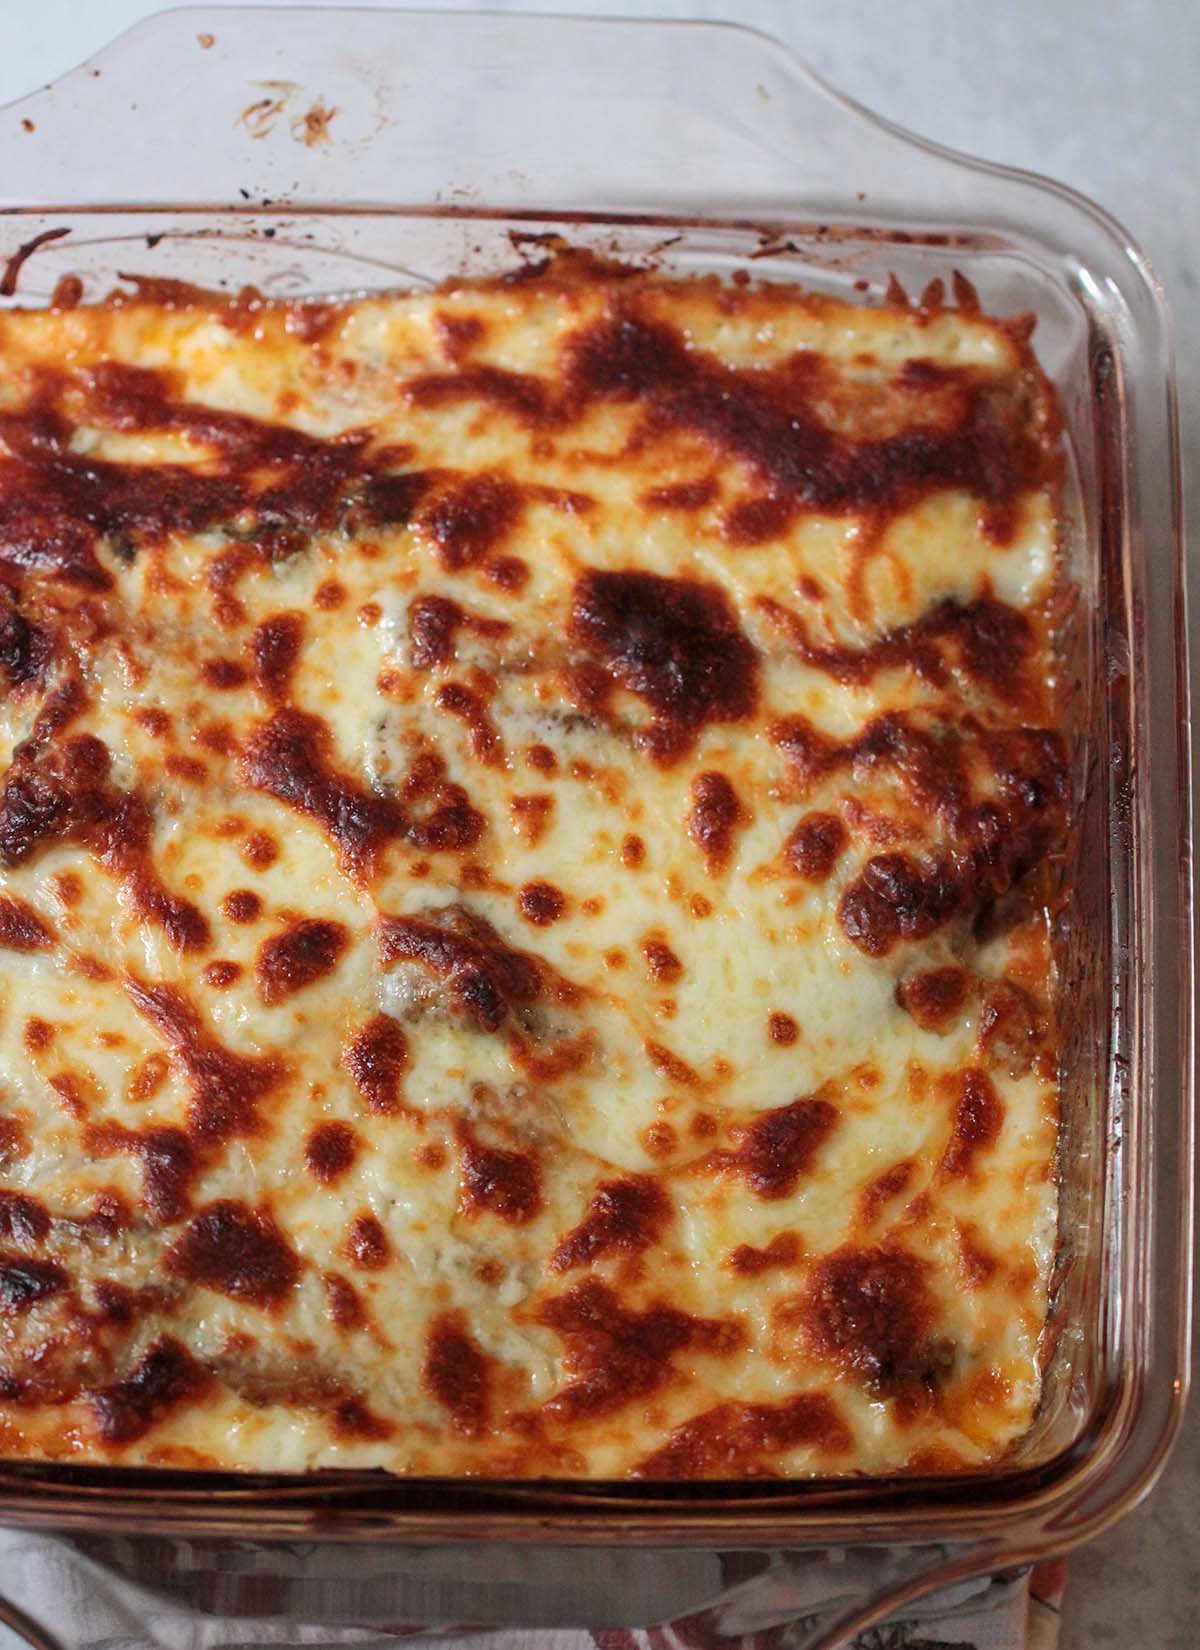 pastelon with platano maduro in a baking dish. Covered with melted cheese.